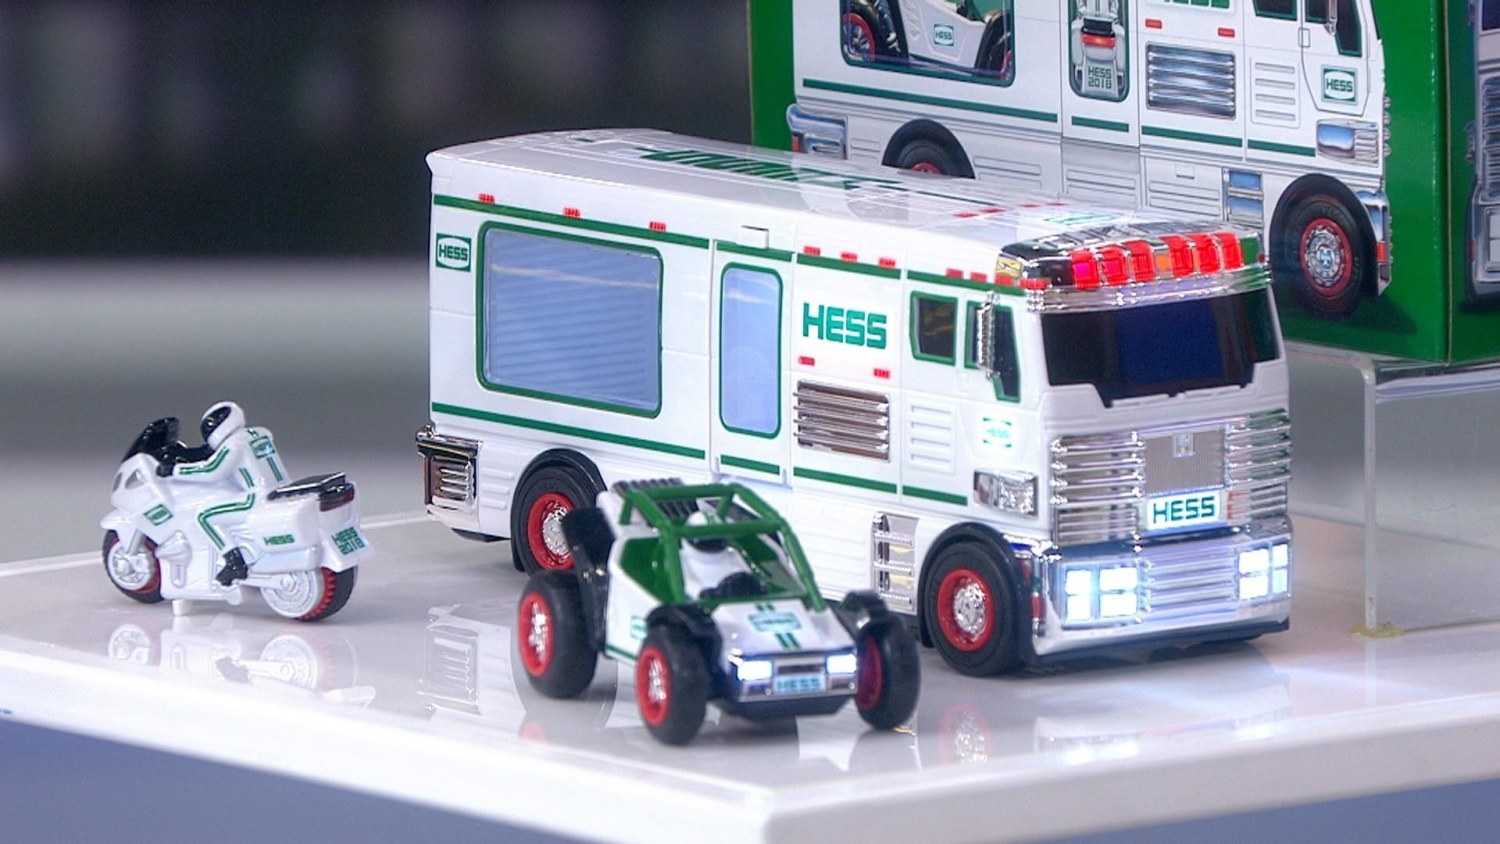 2018 Hess Truck Unveiled For Holidays Klg And Hoda Take A Look